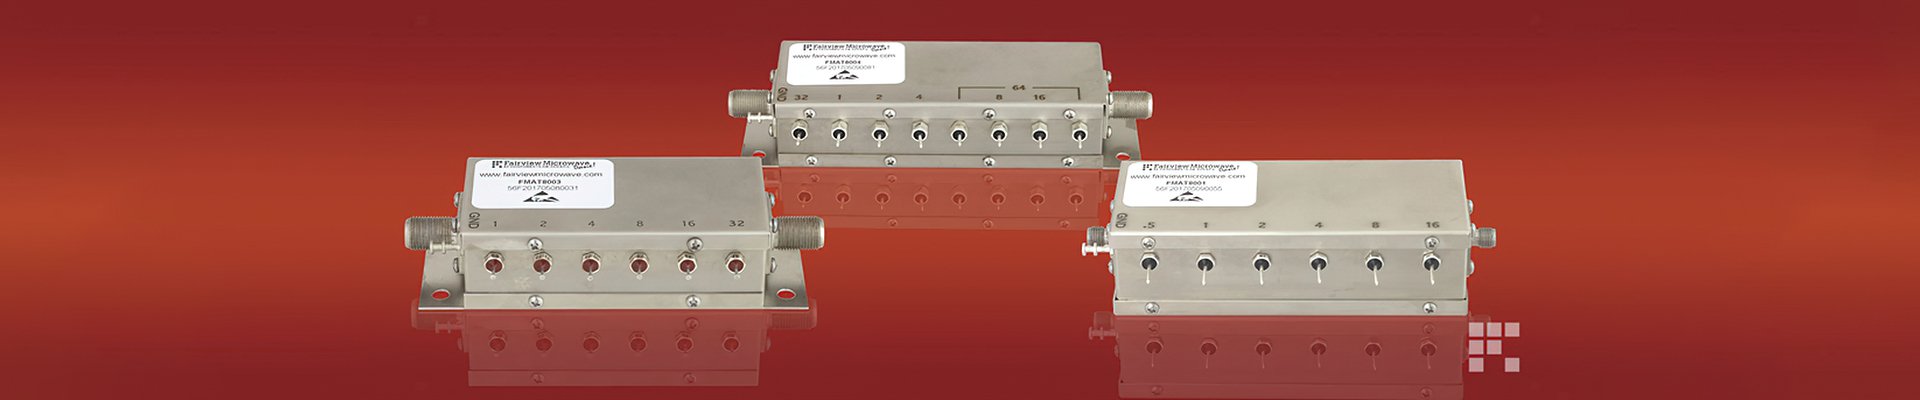 Relay Controlled Programmable Attenuators from Fairview Microwave